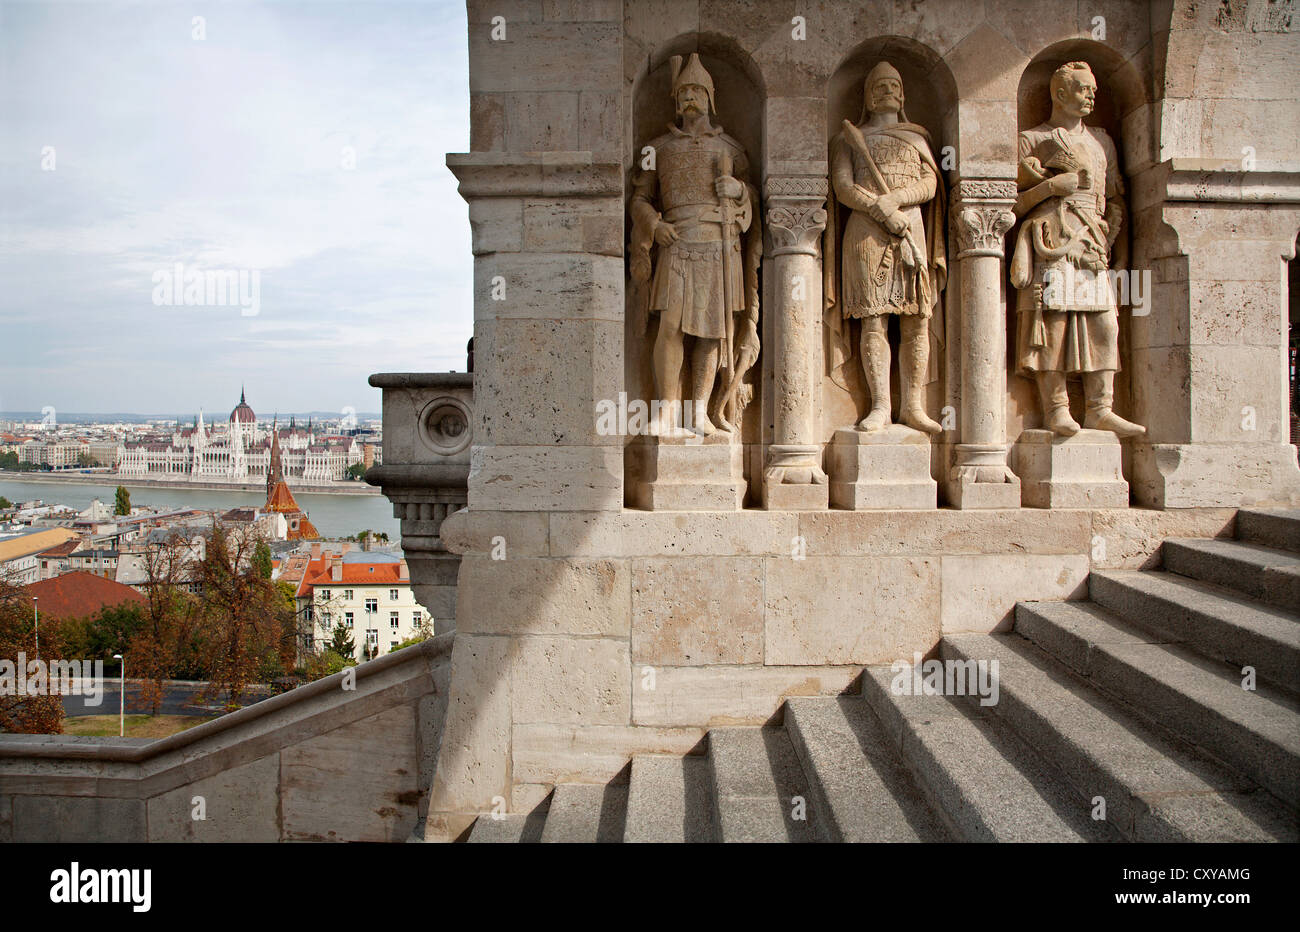 Budapest - guardians statue from Buda walls Stock Photo